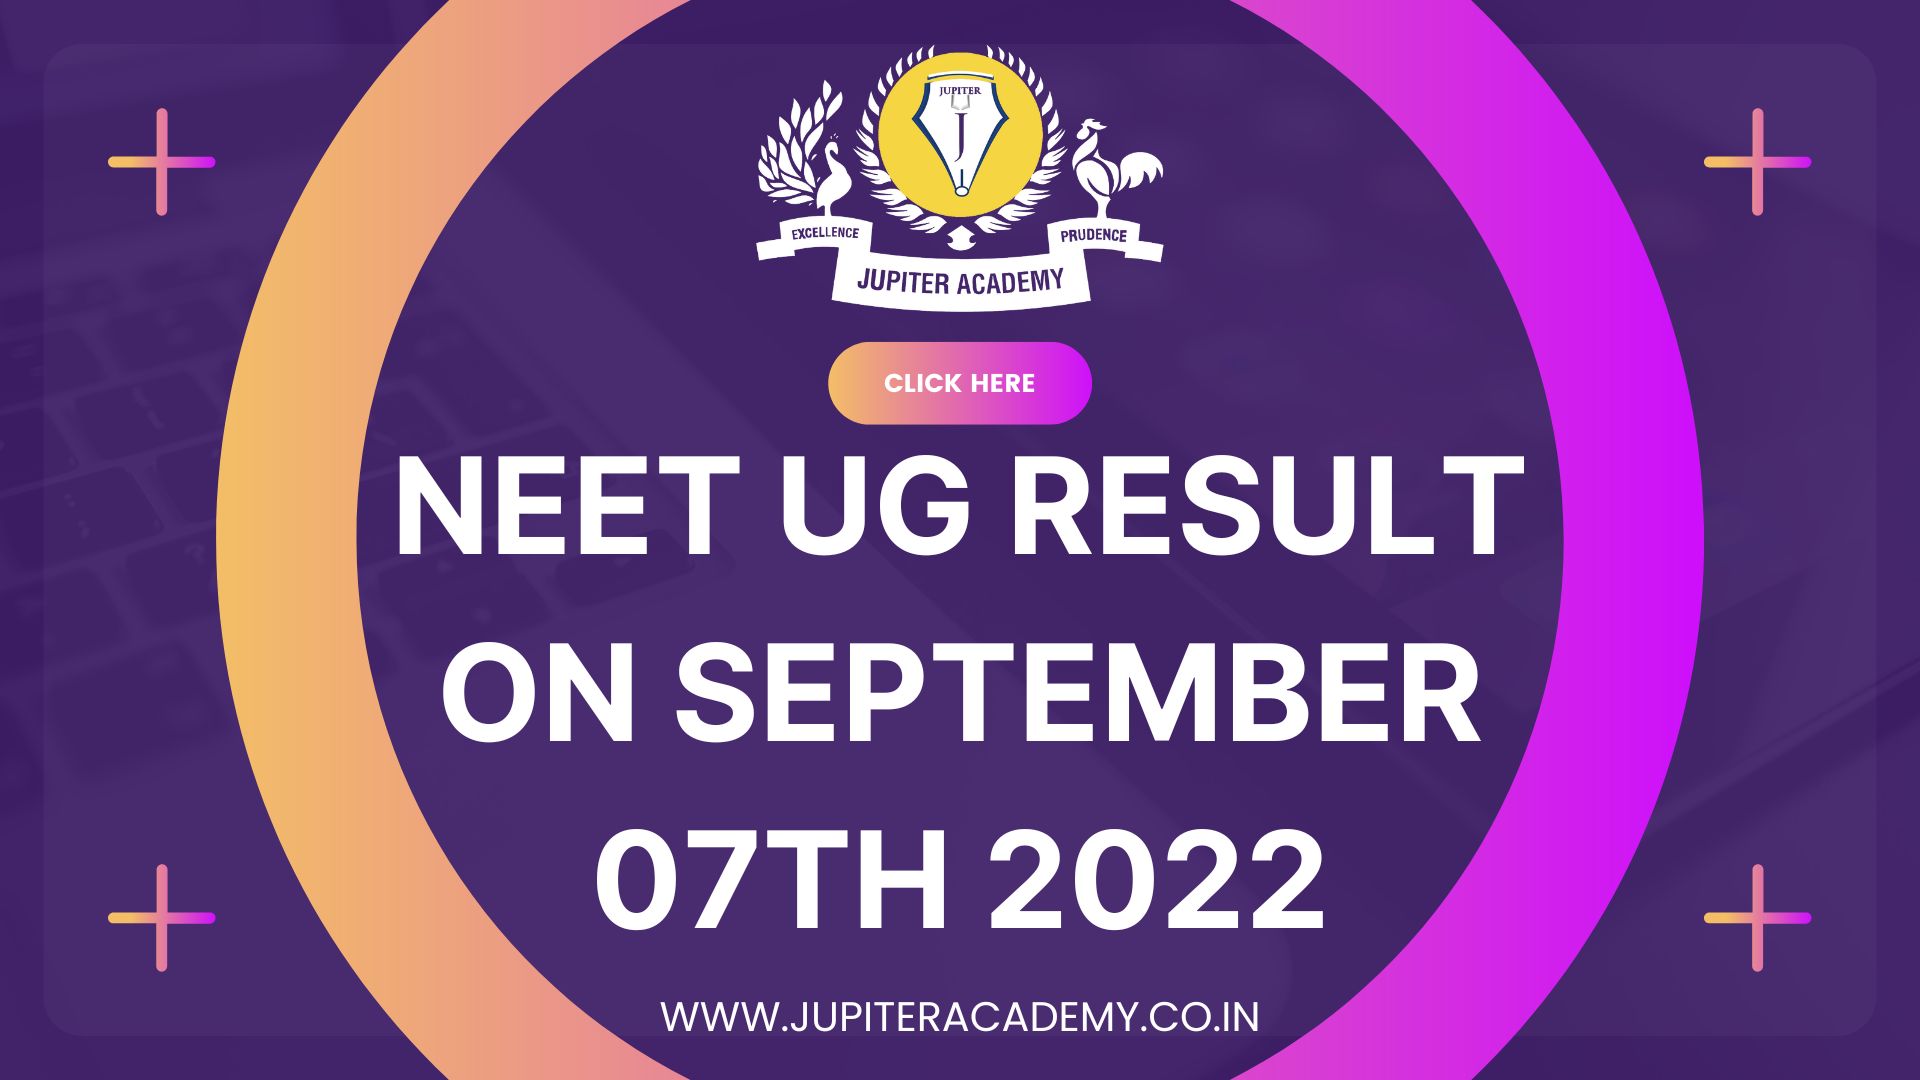 Read more about the article NEET-UG 2022 result